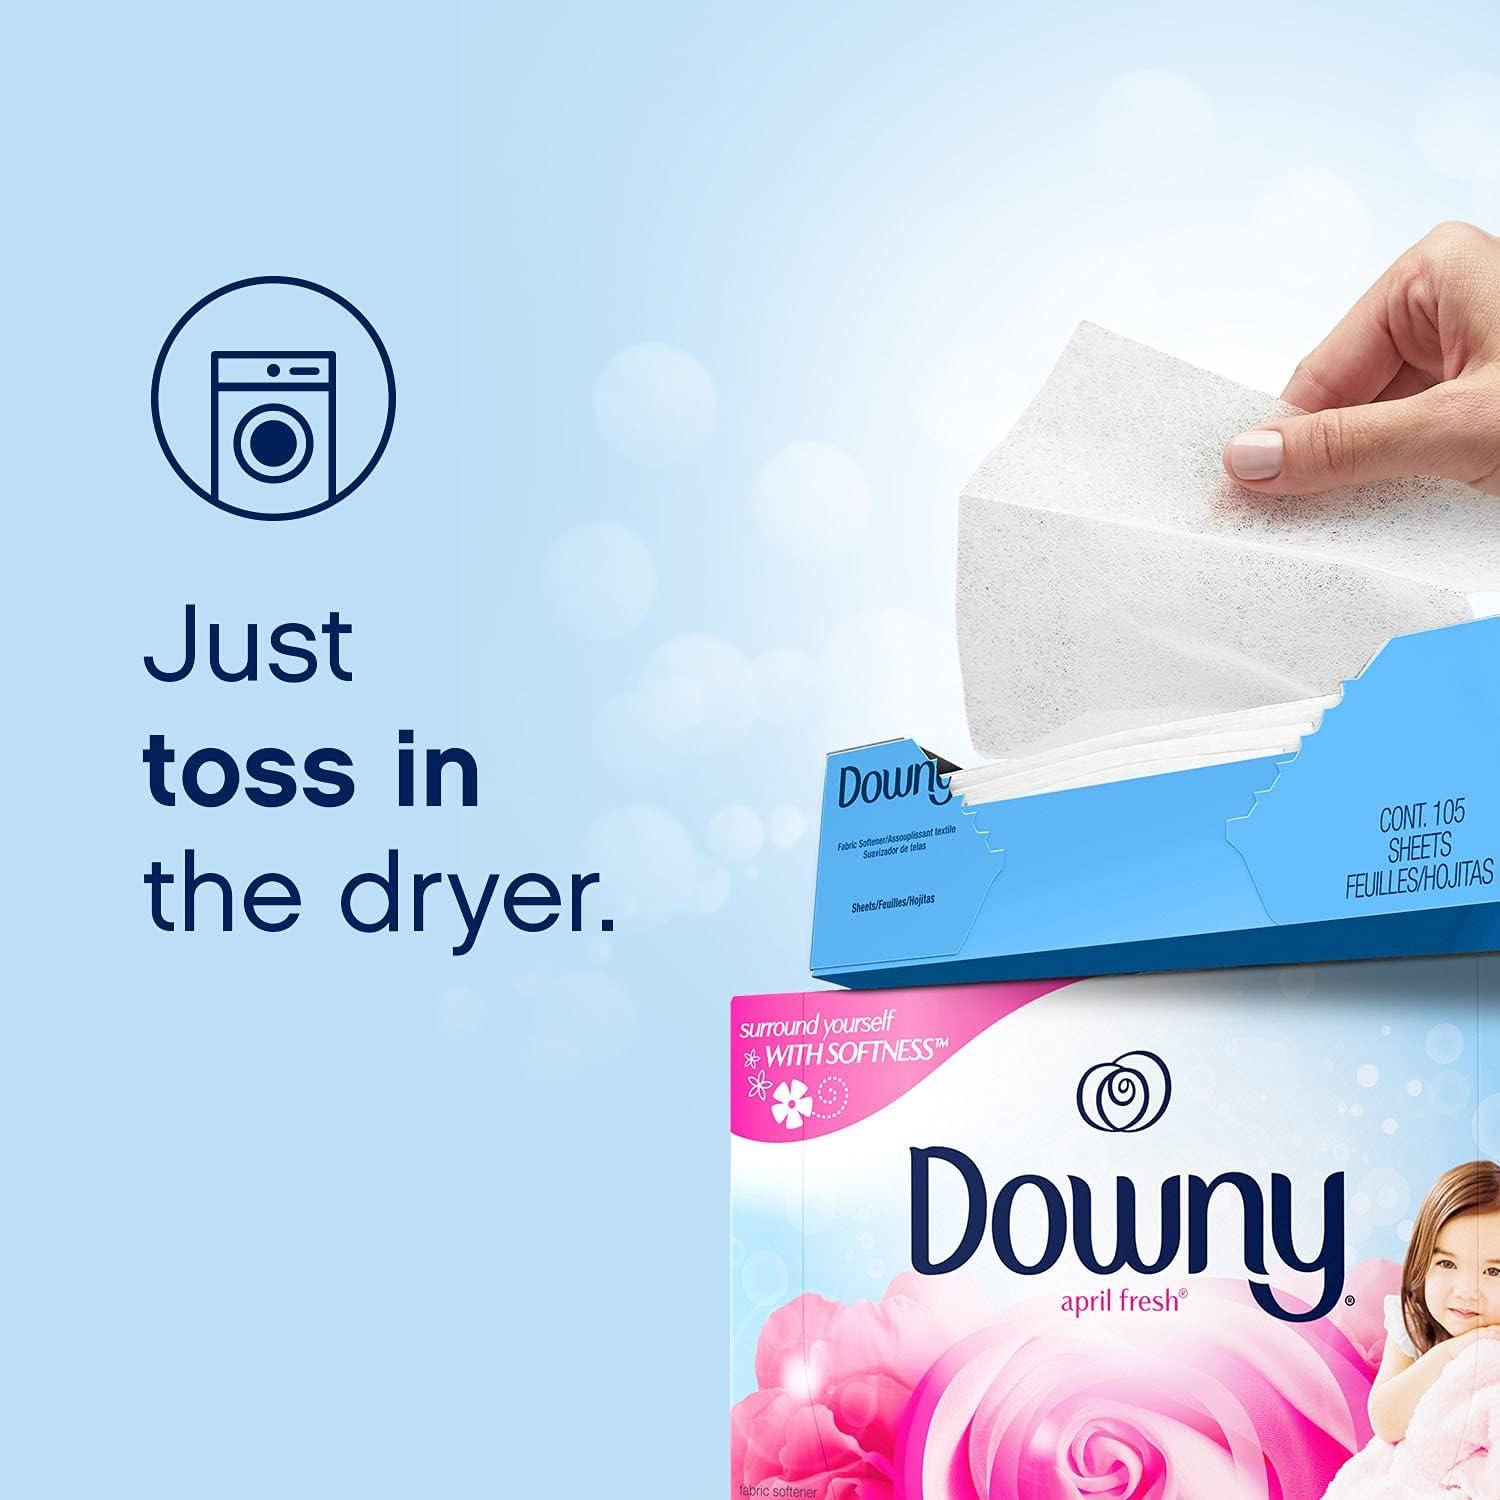  Downy Dryer Sheets Laundry Fabric Softener, Cool